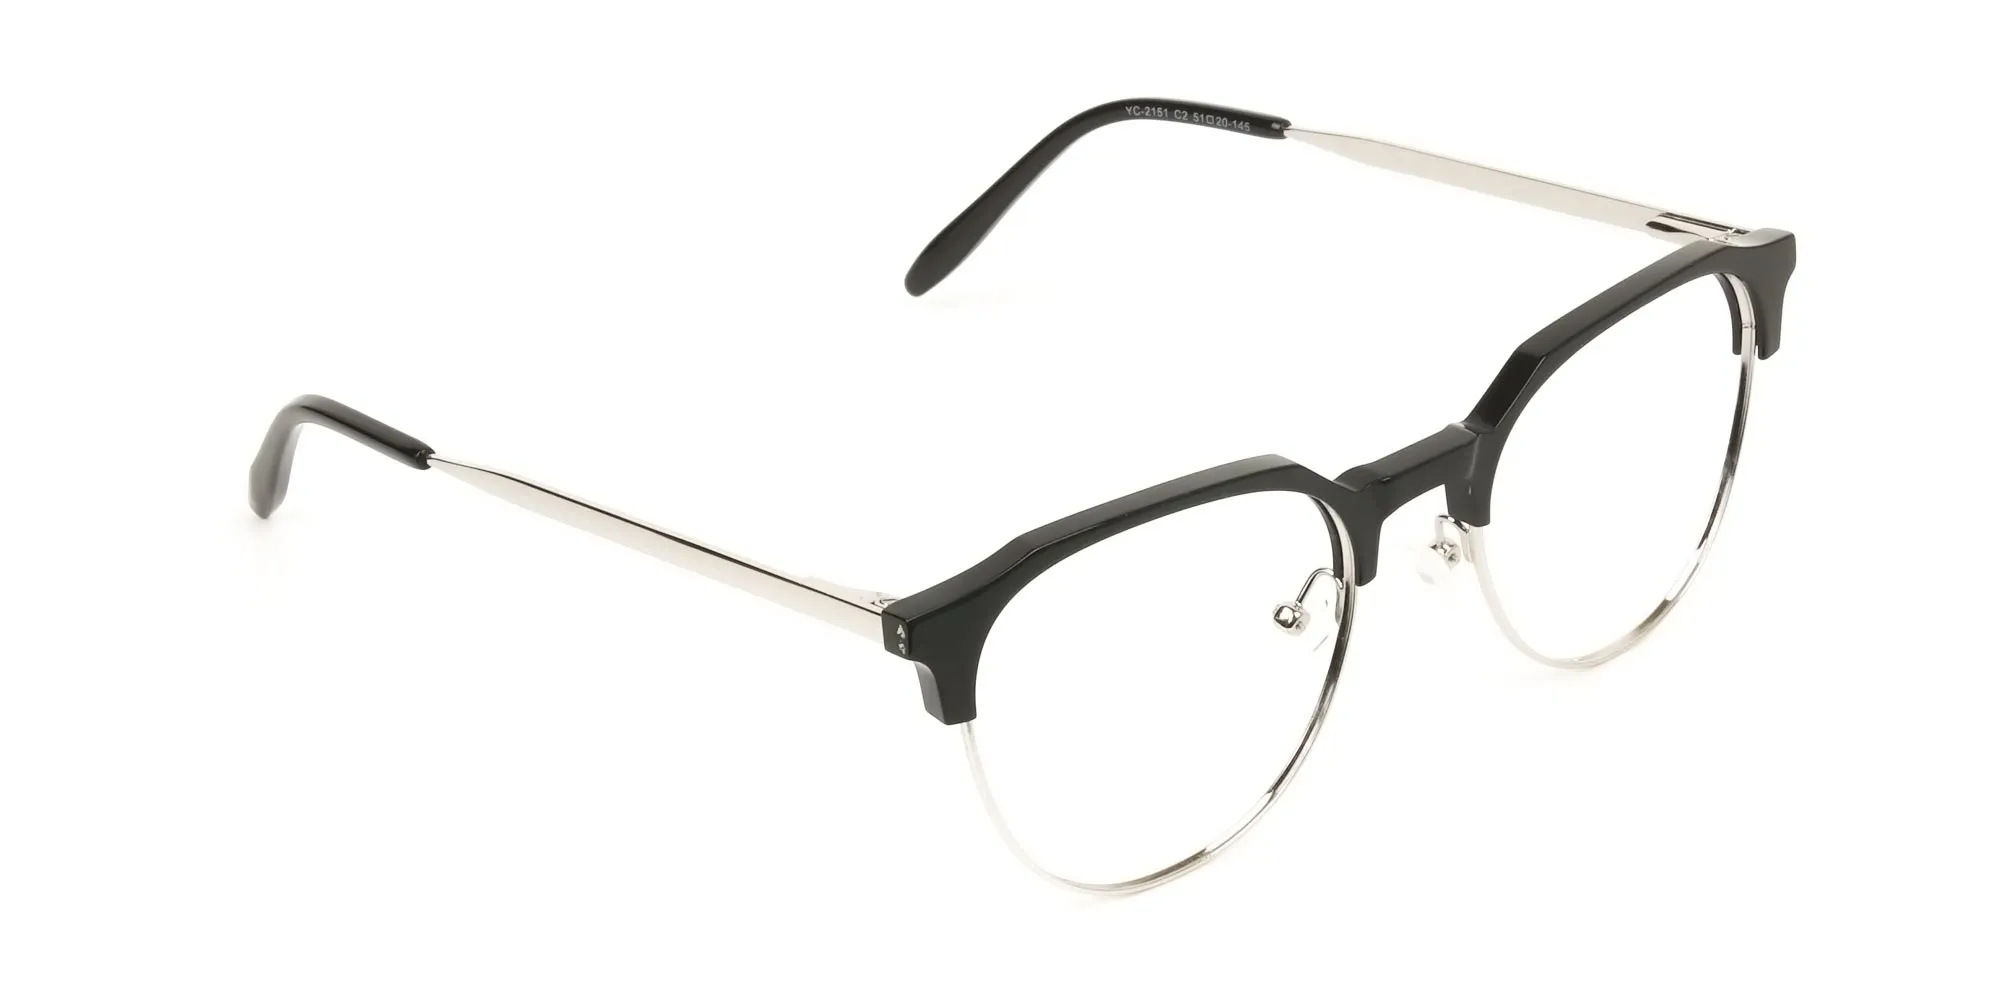 Clubmaster Eyeglasses in Black and Silver Round Frame - 2